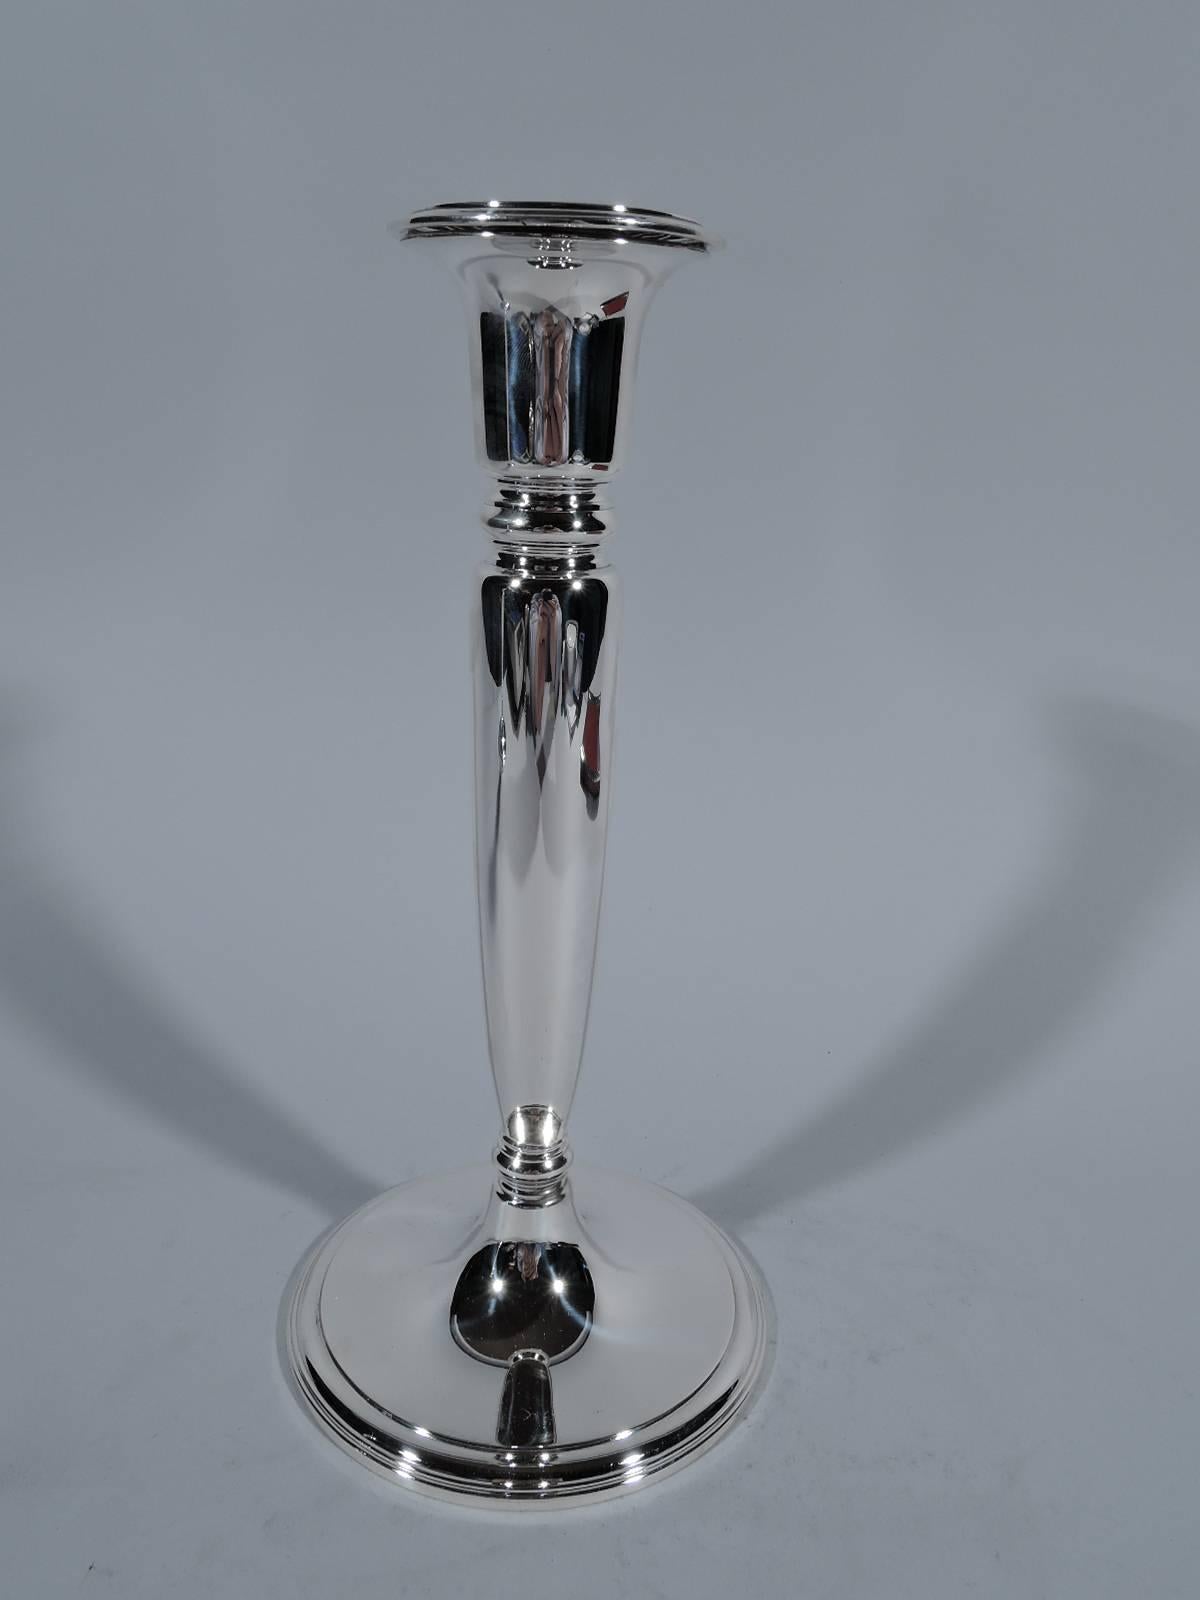 Pair of Modern sterling silver candlesticks. Made by Tiffany & Co. in New York, circa 1926. Each: Tapering shaft terminating in knop on raised foot. Shaft top has knop surmounted by urn socket with stepped rim. Hallmarks includes pattern no. 20762